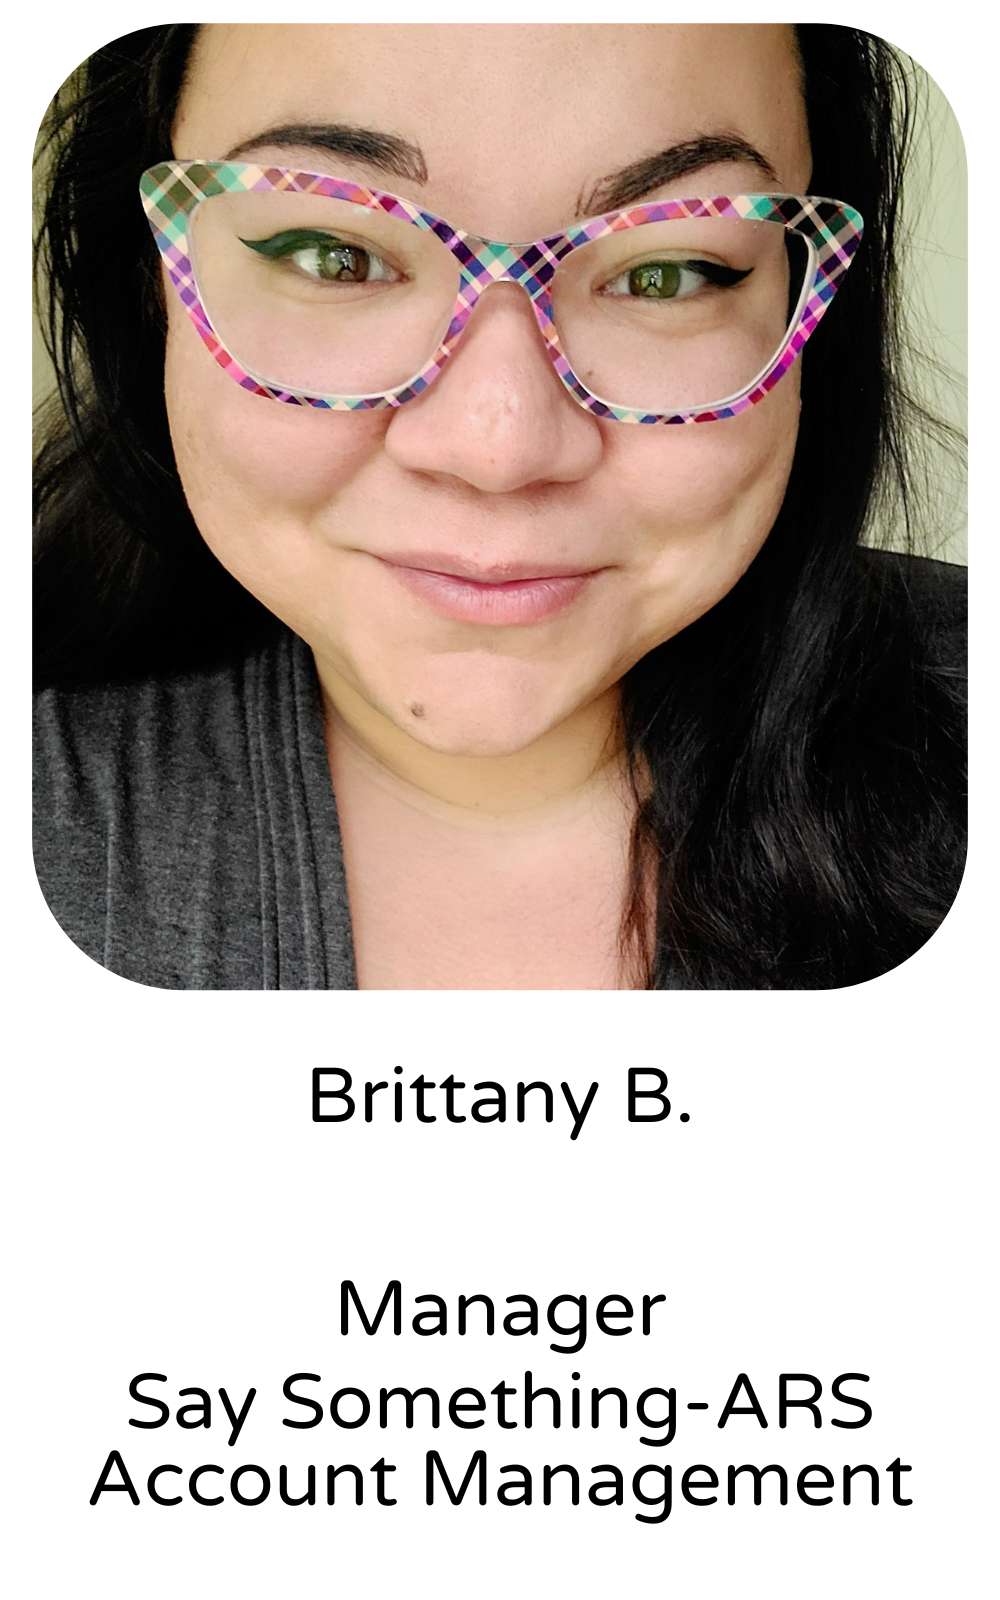 Brittany B., Manager, Say Something-ARS Account Management